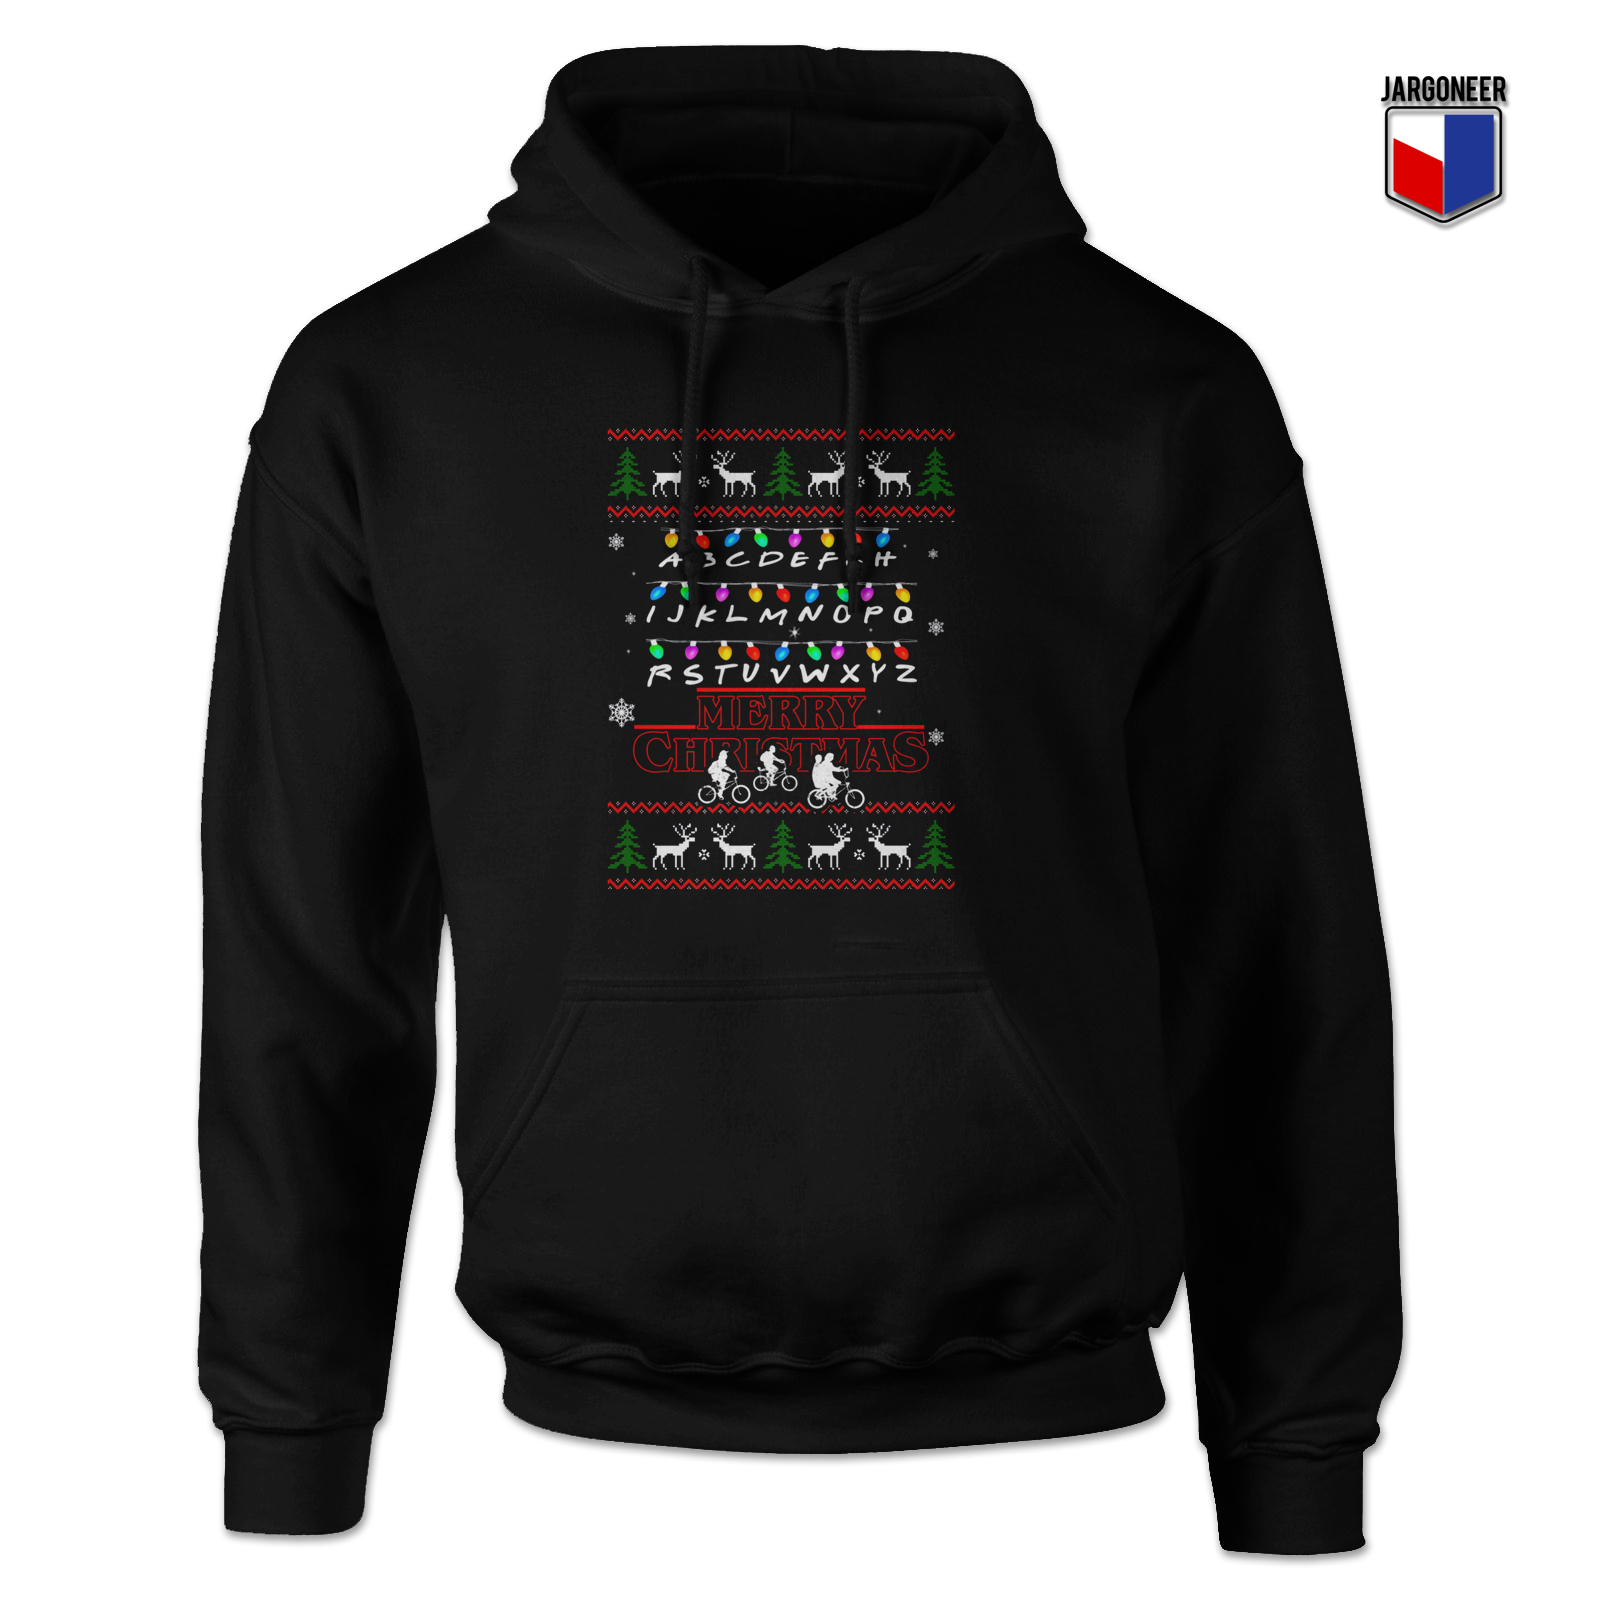 Merry Christmas Stranger Things Ugly Hoodie - Shop Unique Graphic Cool Shirt Designs